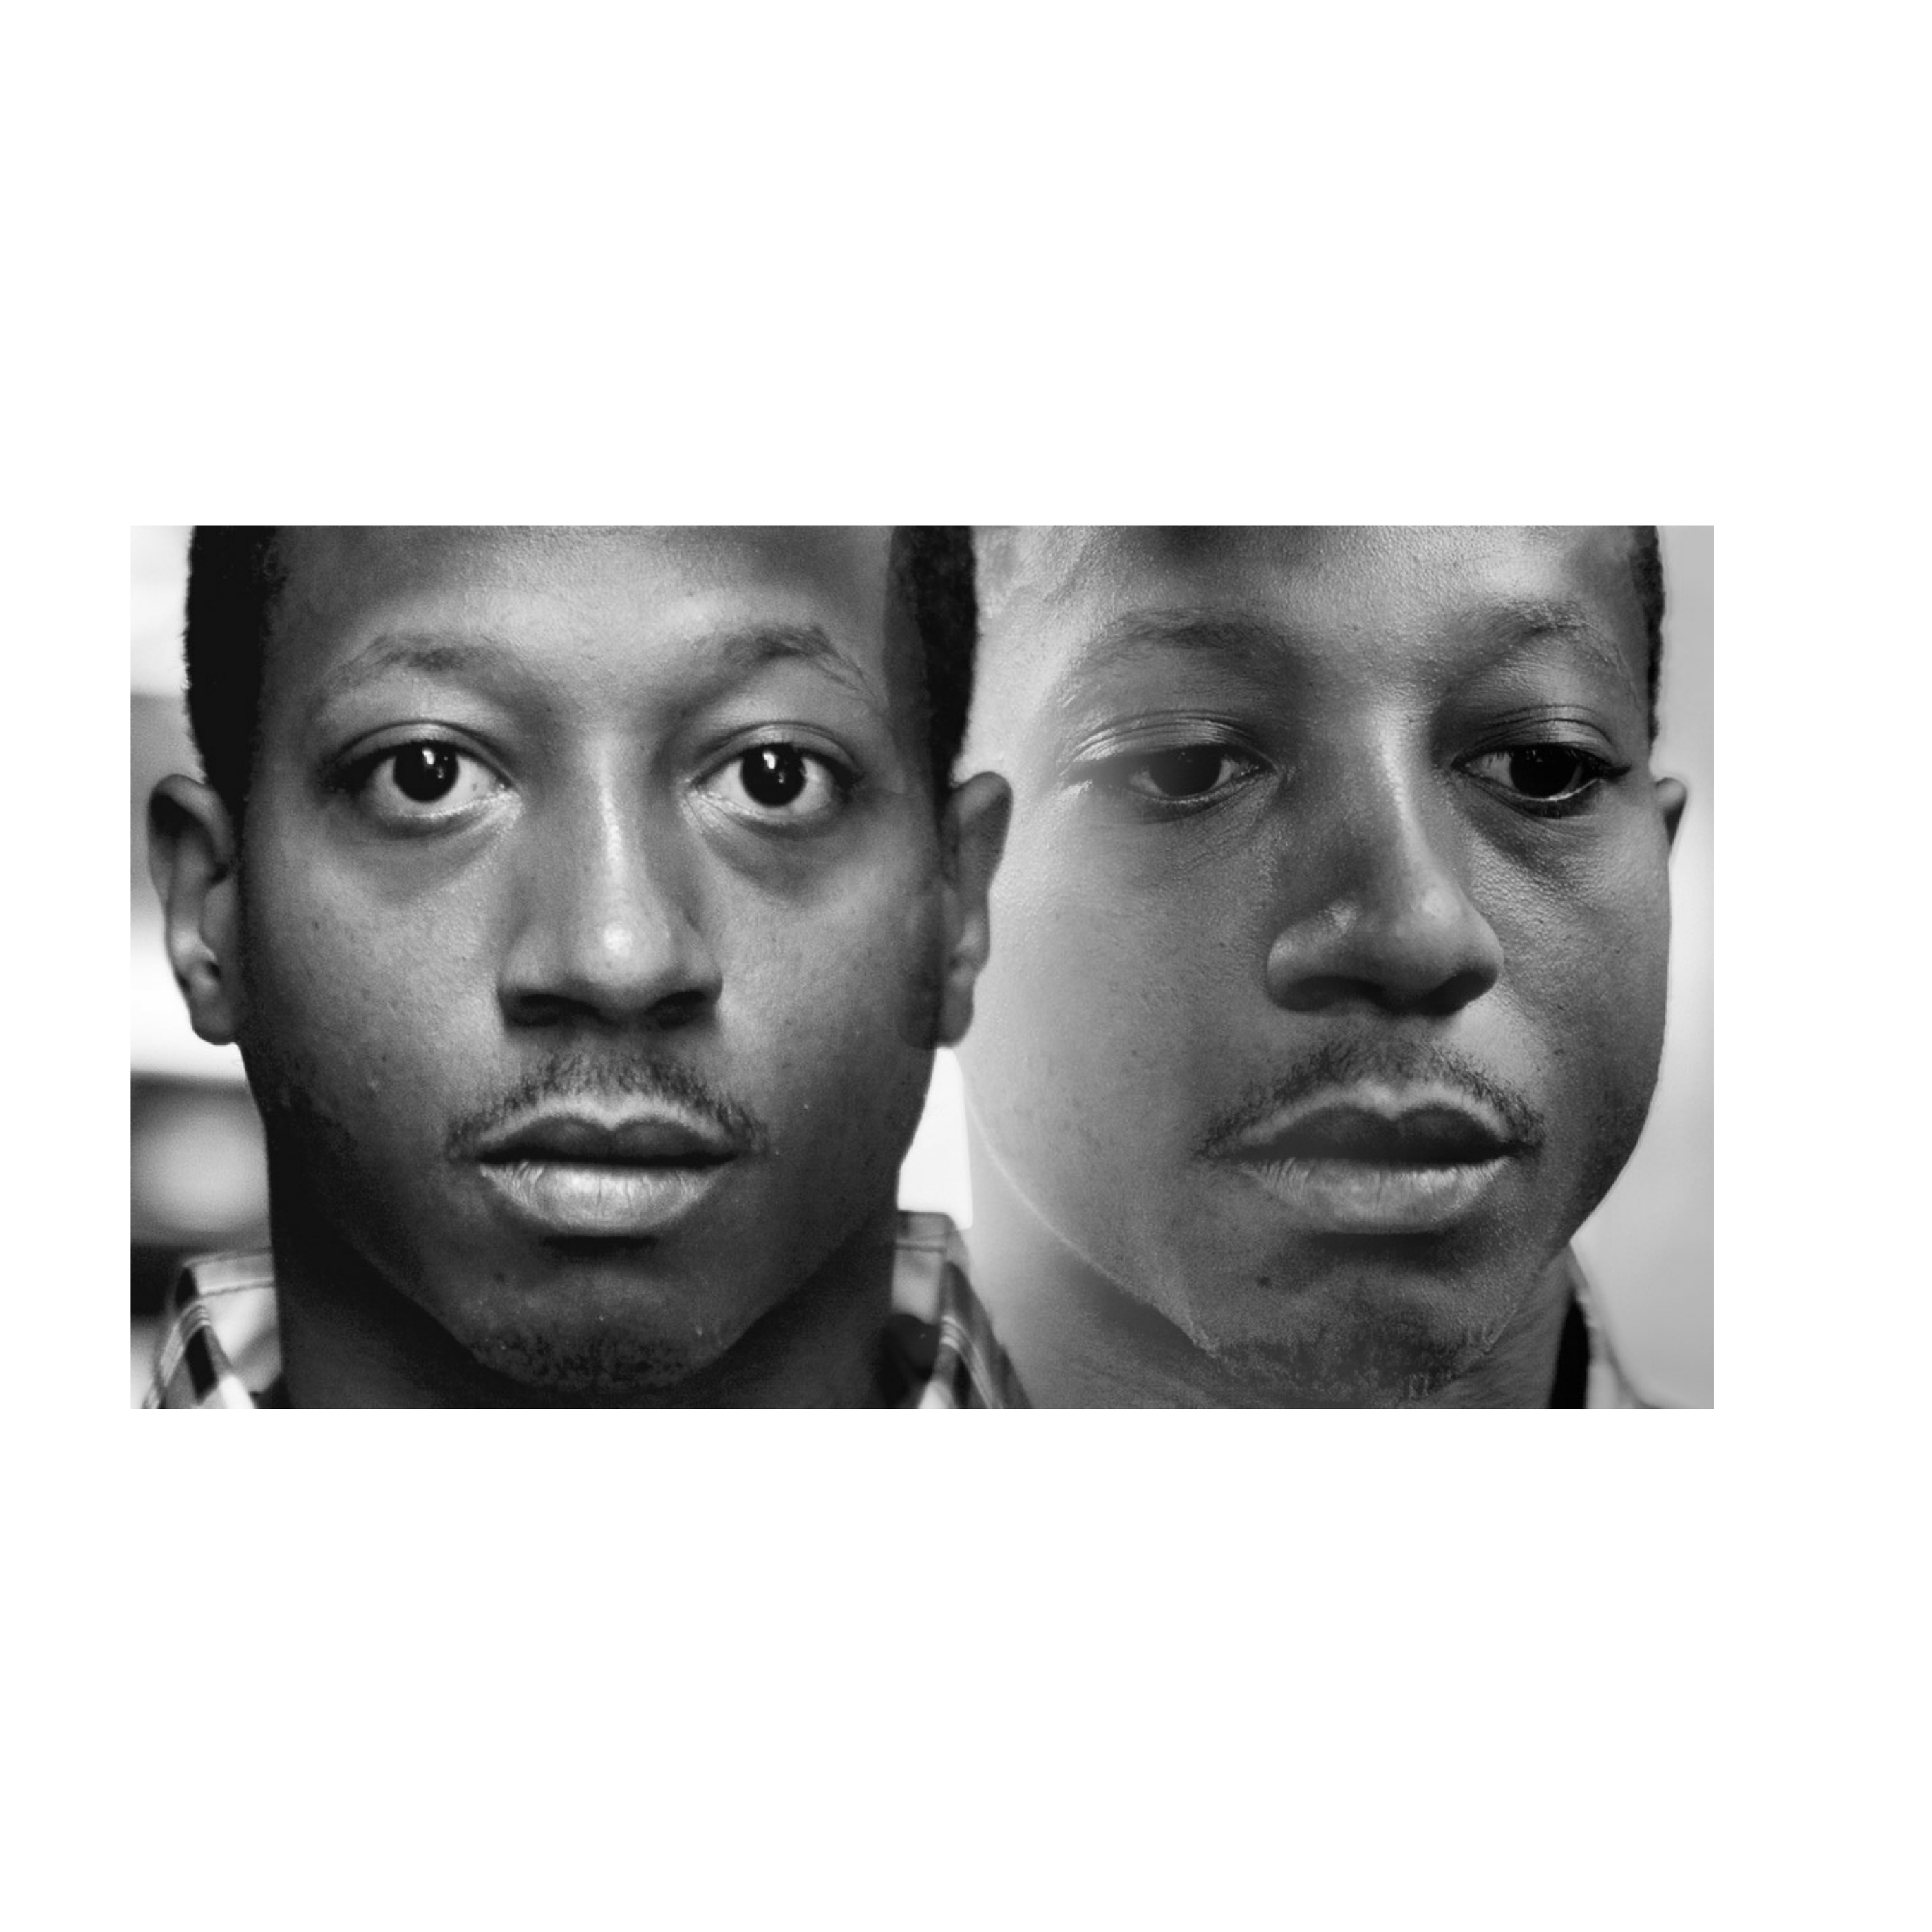 Cover image for  article: "Kalief Browder": One Packed Minute Exposes Three Years of Injustice